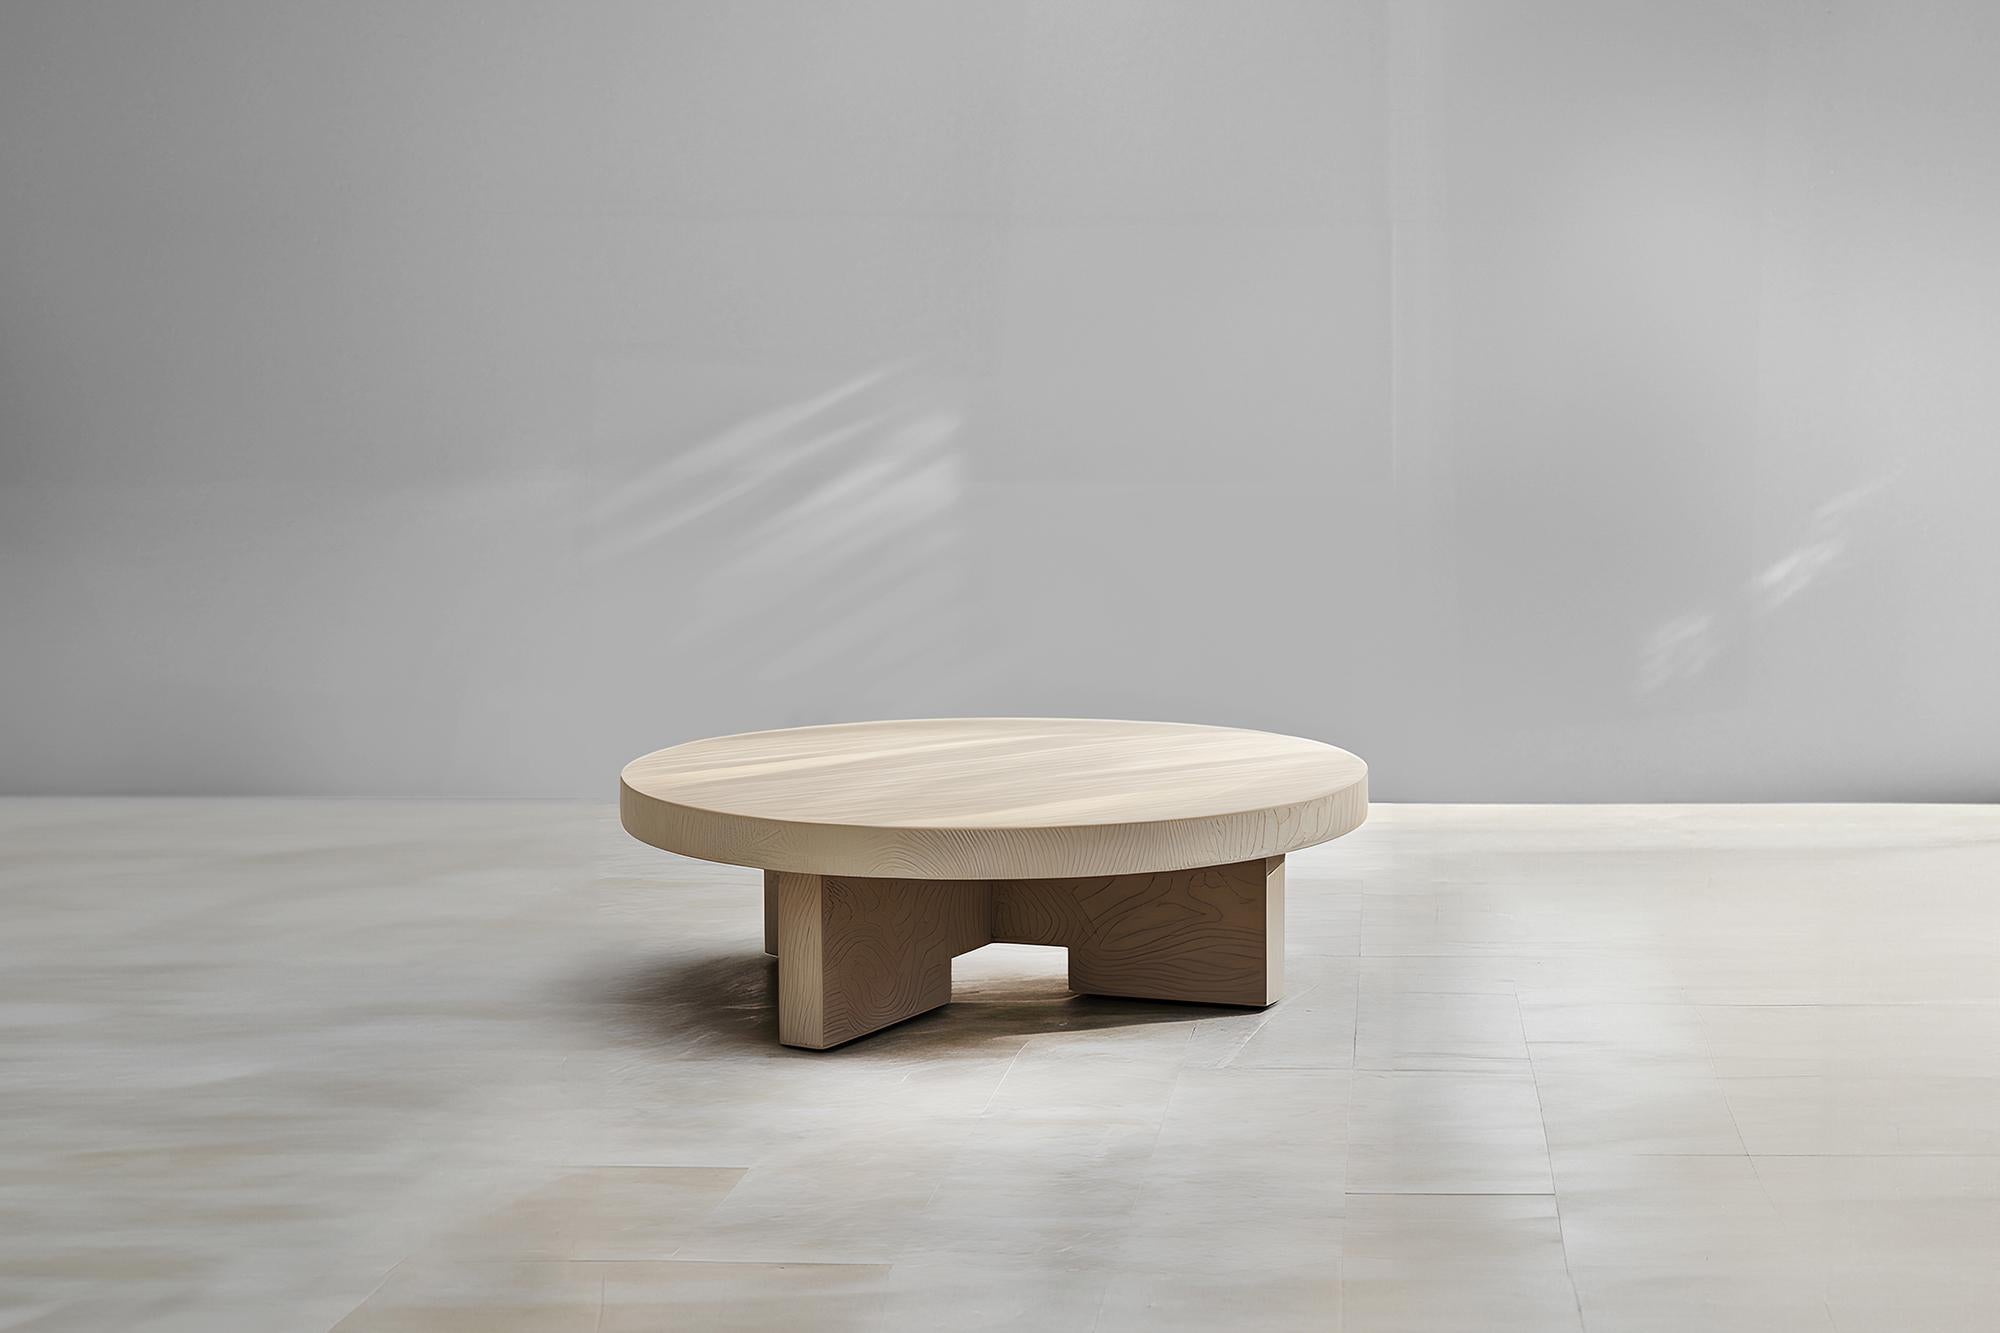 Compact Round Coffee Table in Black Tint - Modern Fundamenta 34 by NONO


Sculptural coffee table made of solid wood with a natural water-based or black tinted finish. Due to the nature of the production process, each piece may vary in grain,